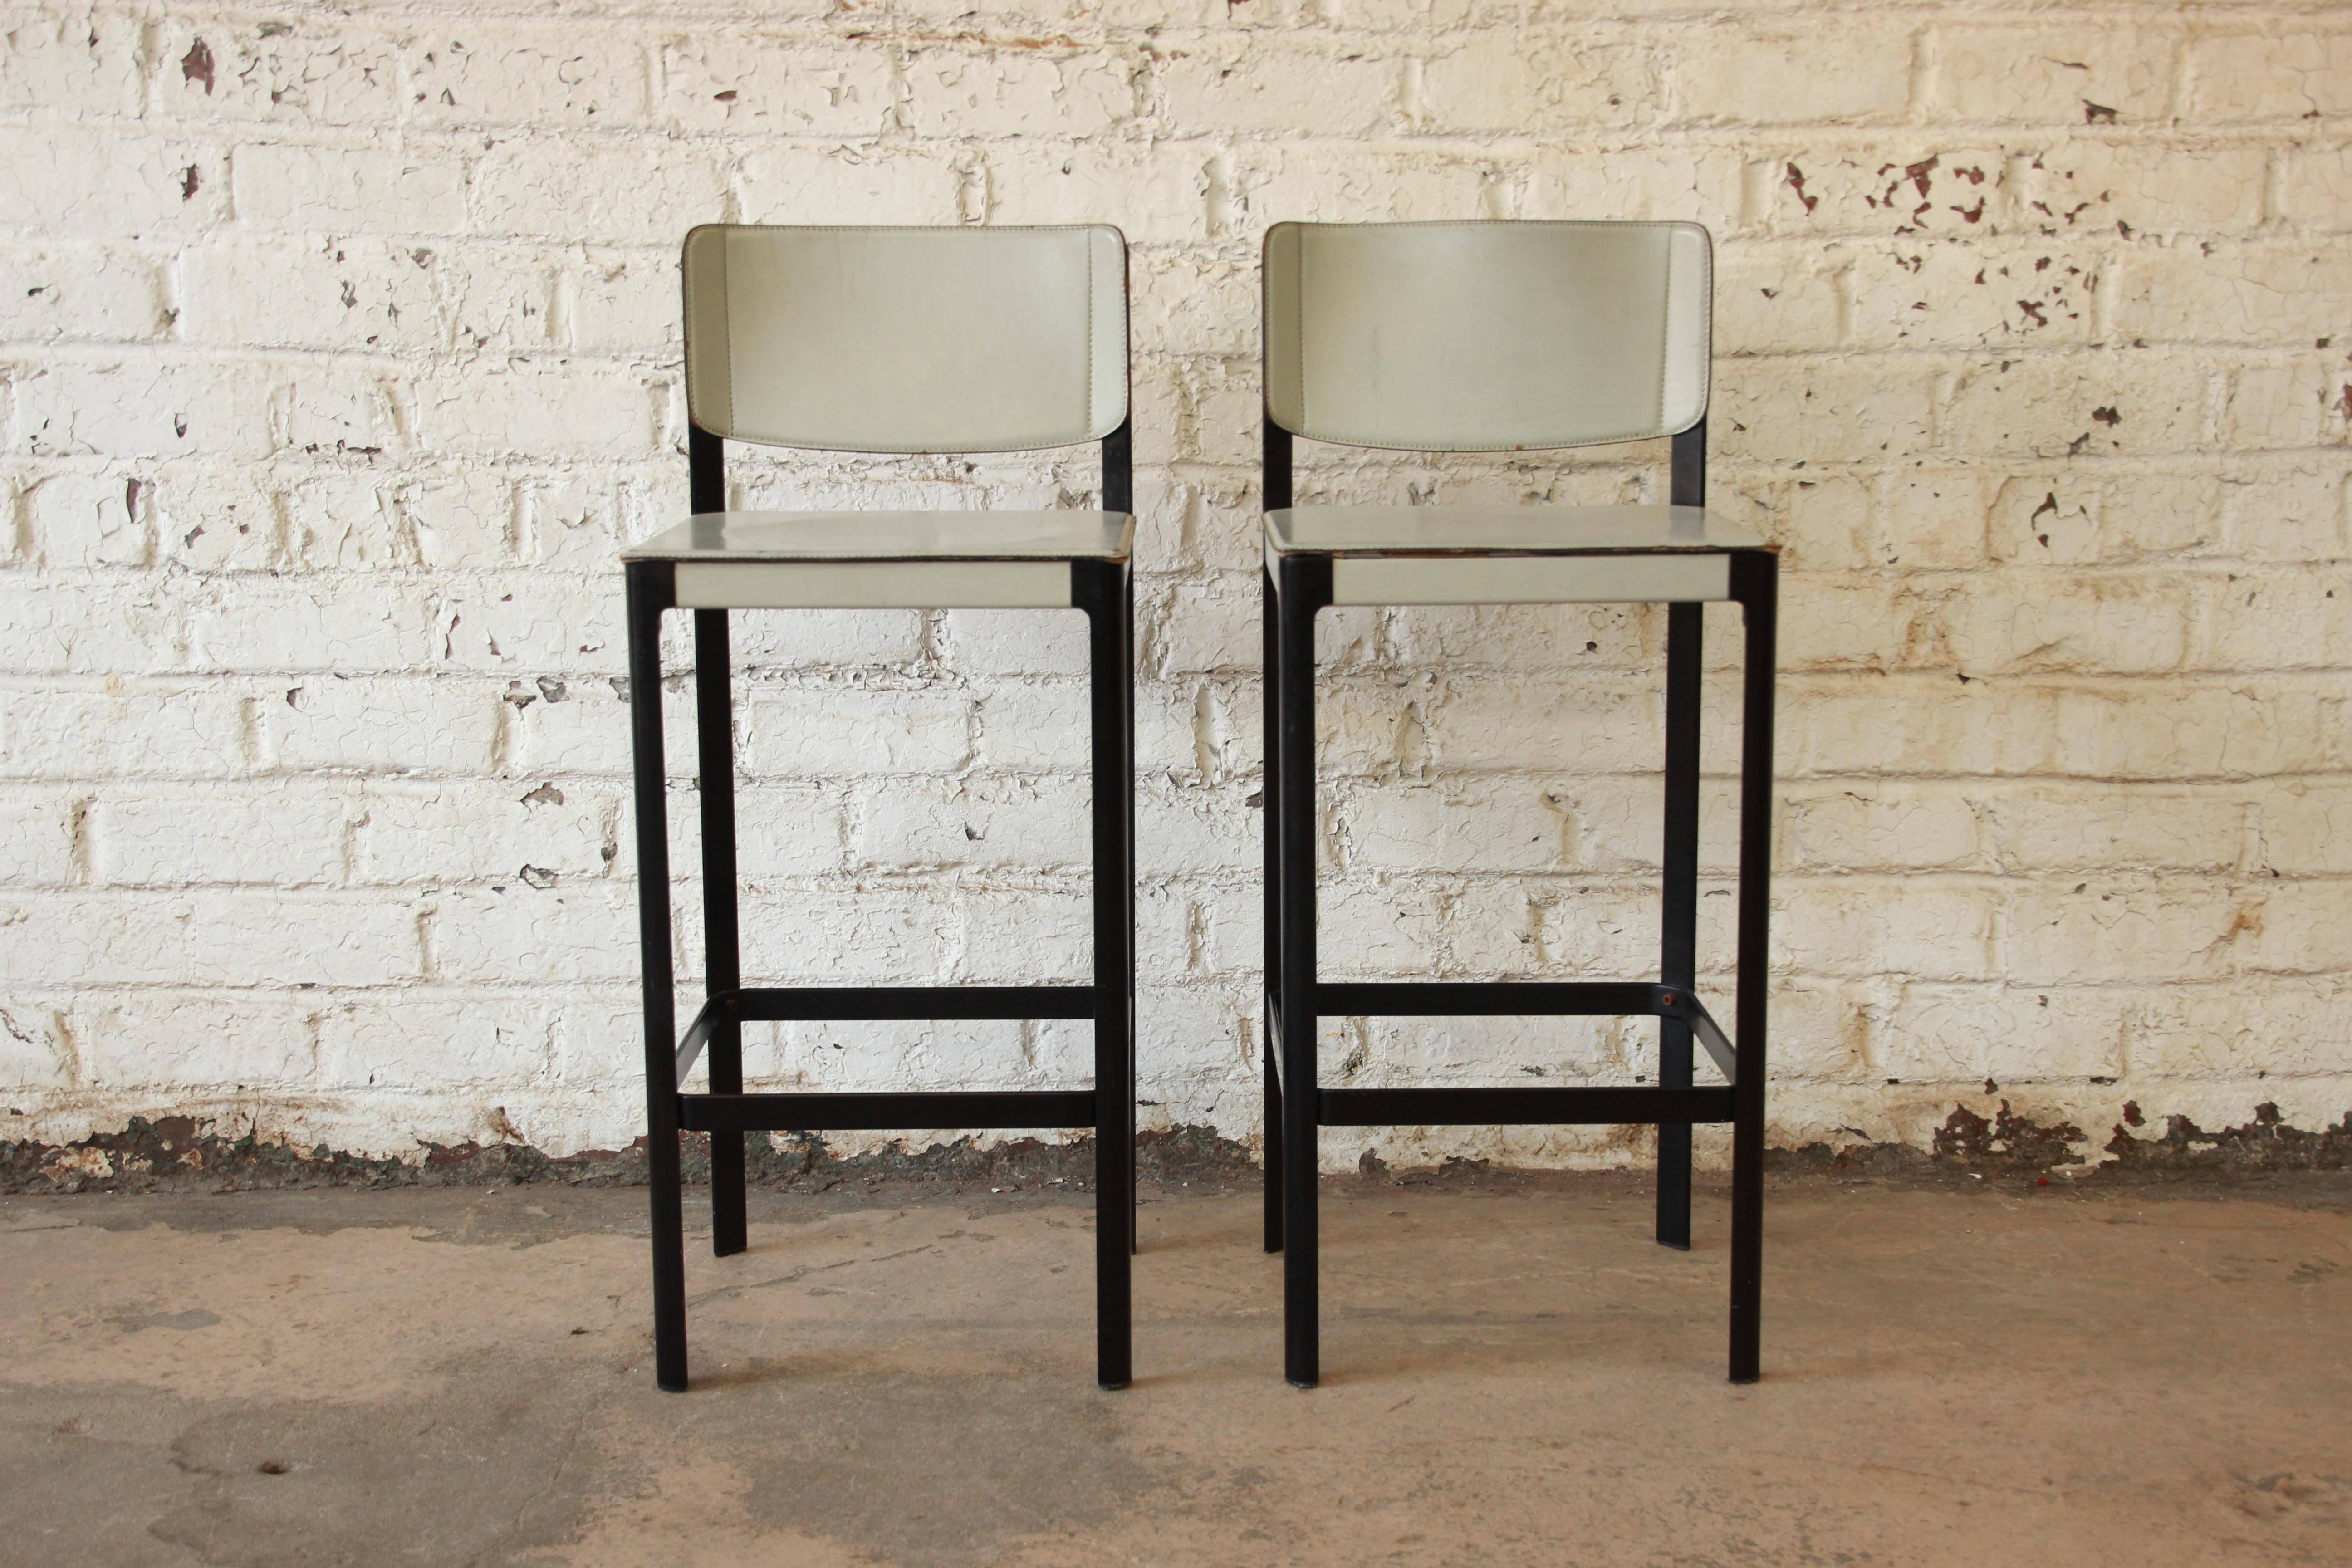 A stunning pair of Sistina Italian leather bar stools by Matteo Grassi. The stools are upholstered in hand-stitched coach hide leather, over black aluminium frames, with unique impressed circular seats. Each stool has "Matteograssi"